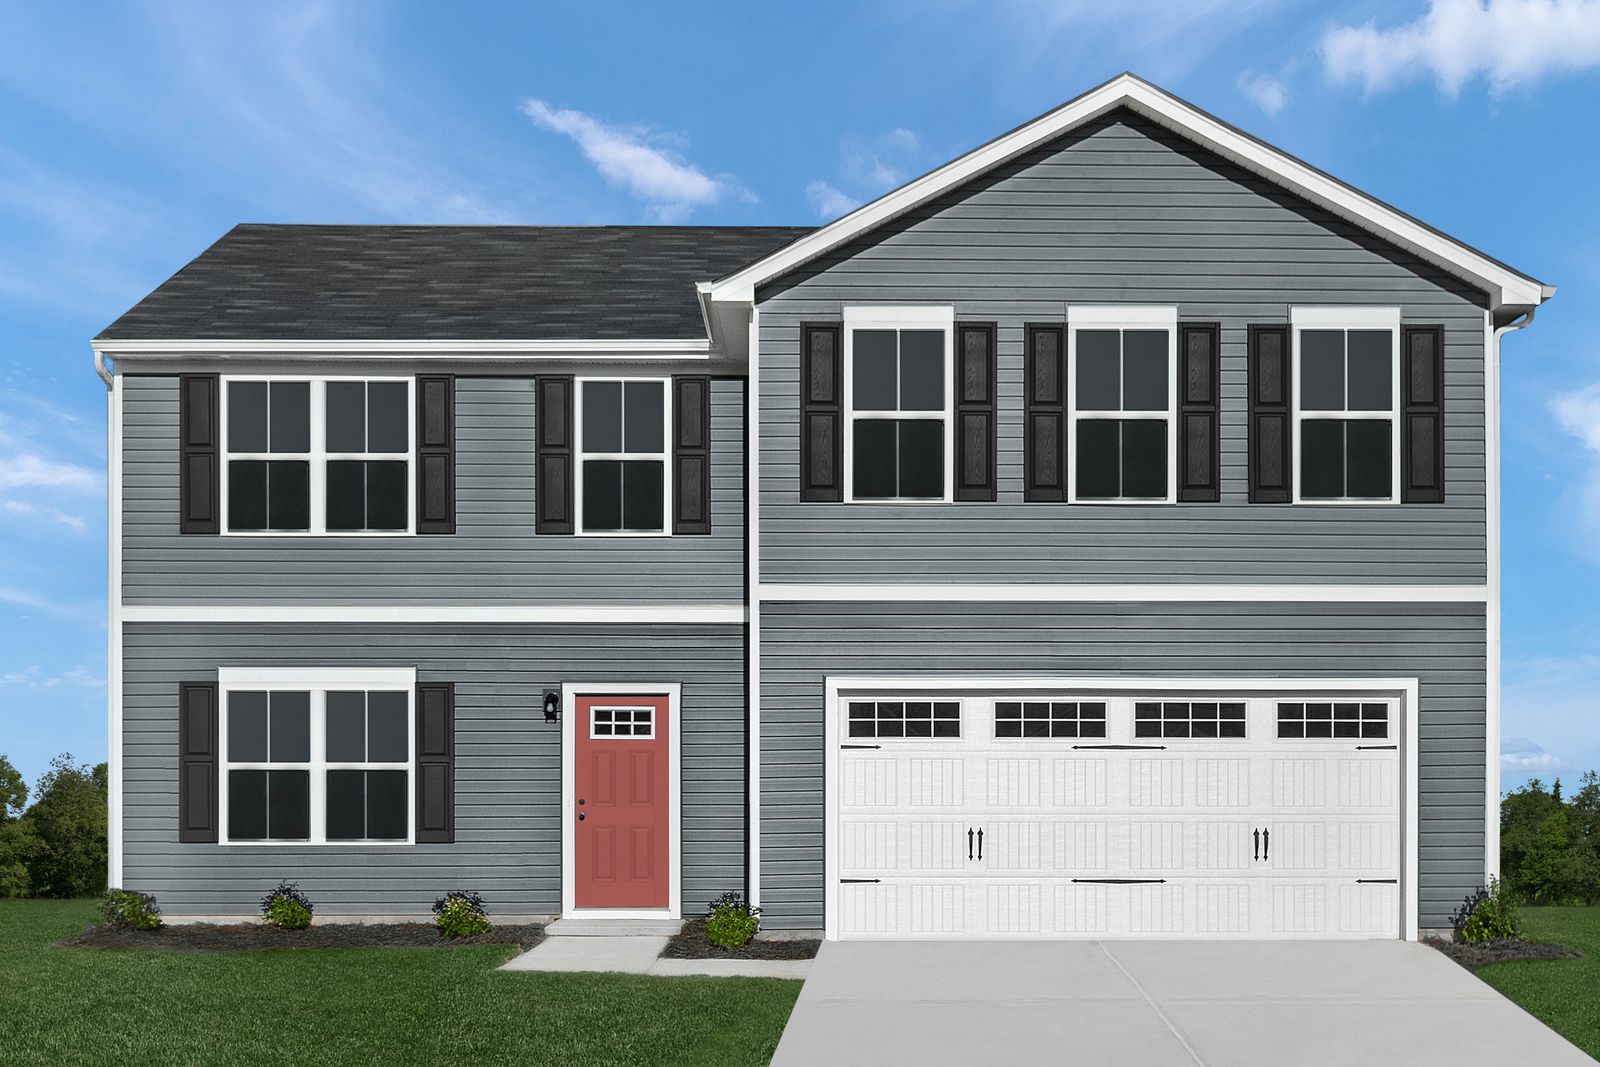 LOWEST PRICED NEW SINGLE FAMILY HOMES CLOSE TO MOORESVILLE